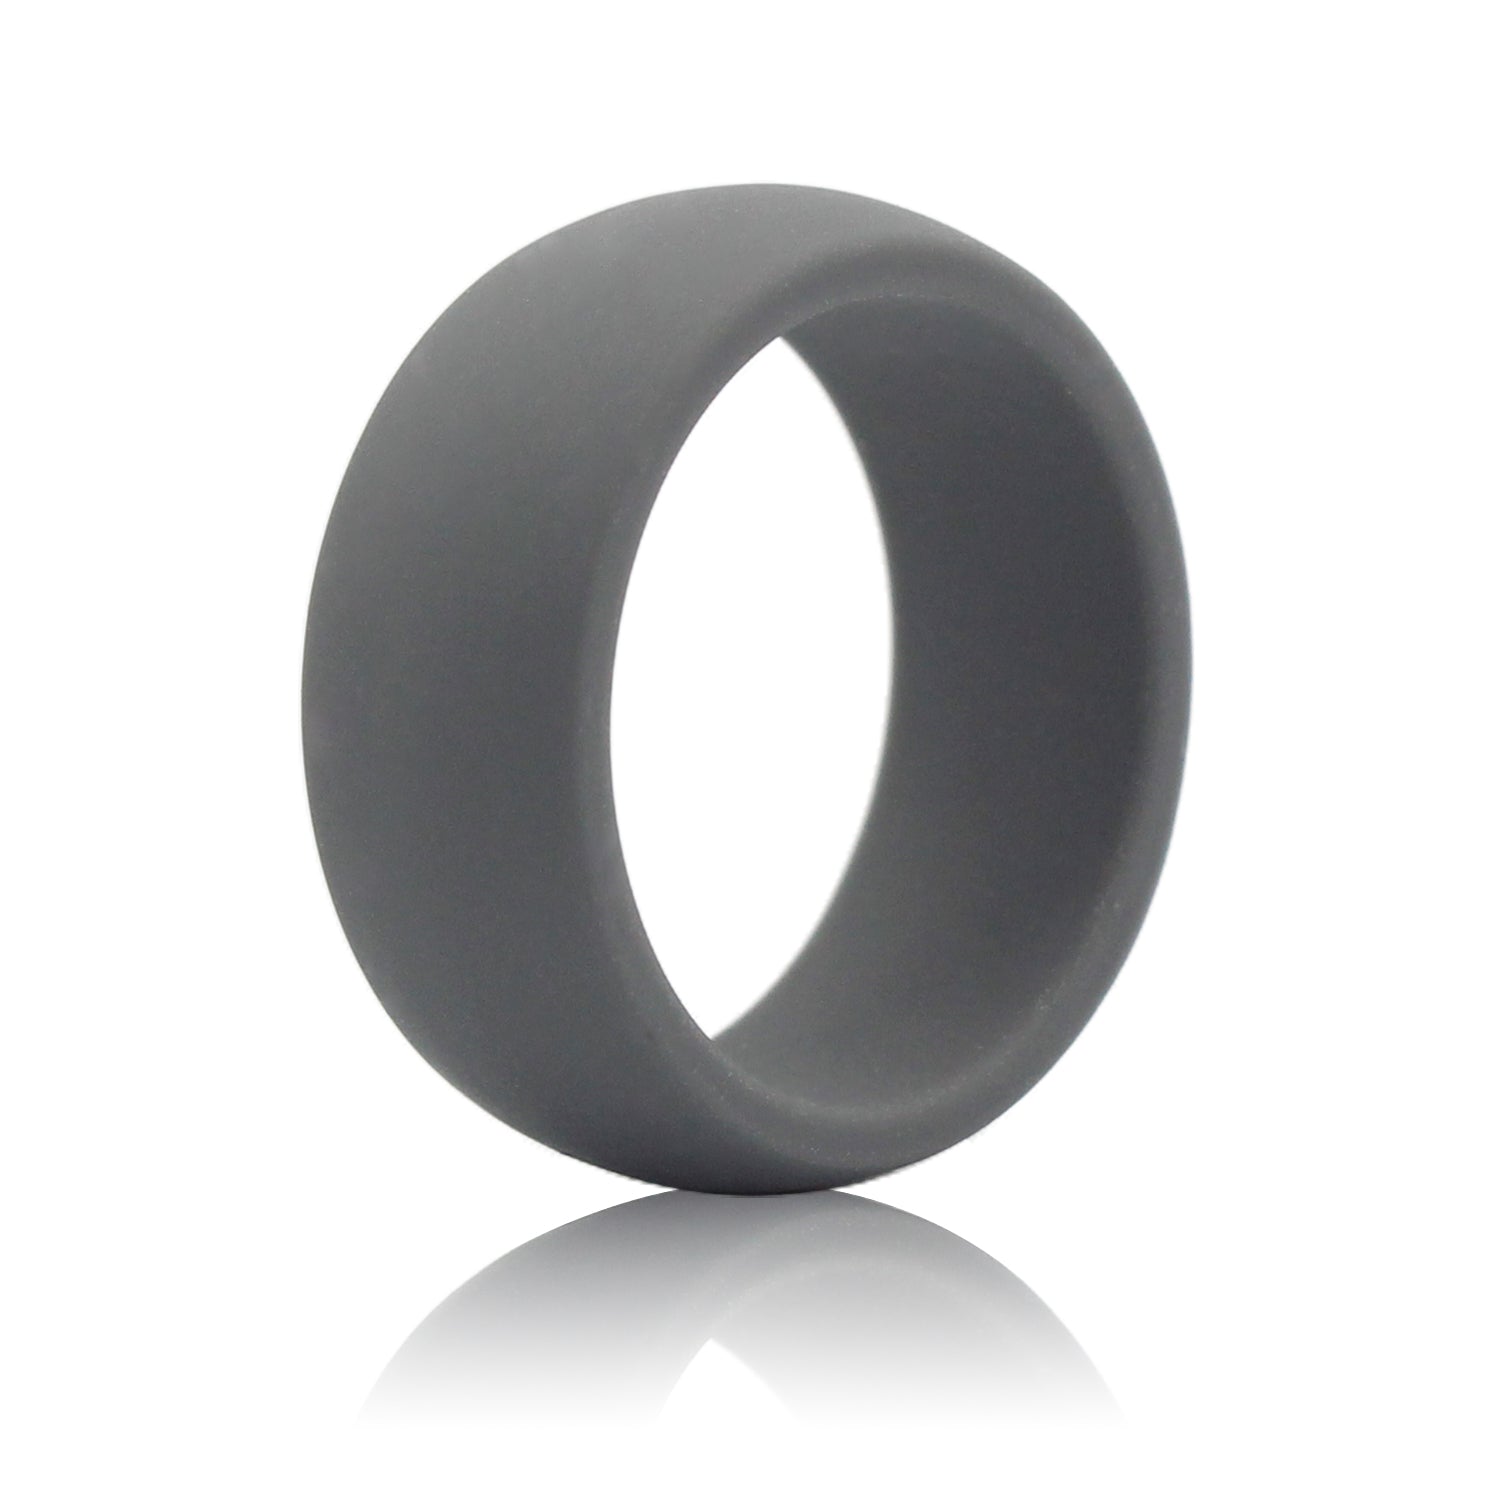 Arc Edge Silicone Rings – CheapSiliconeRings